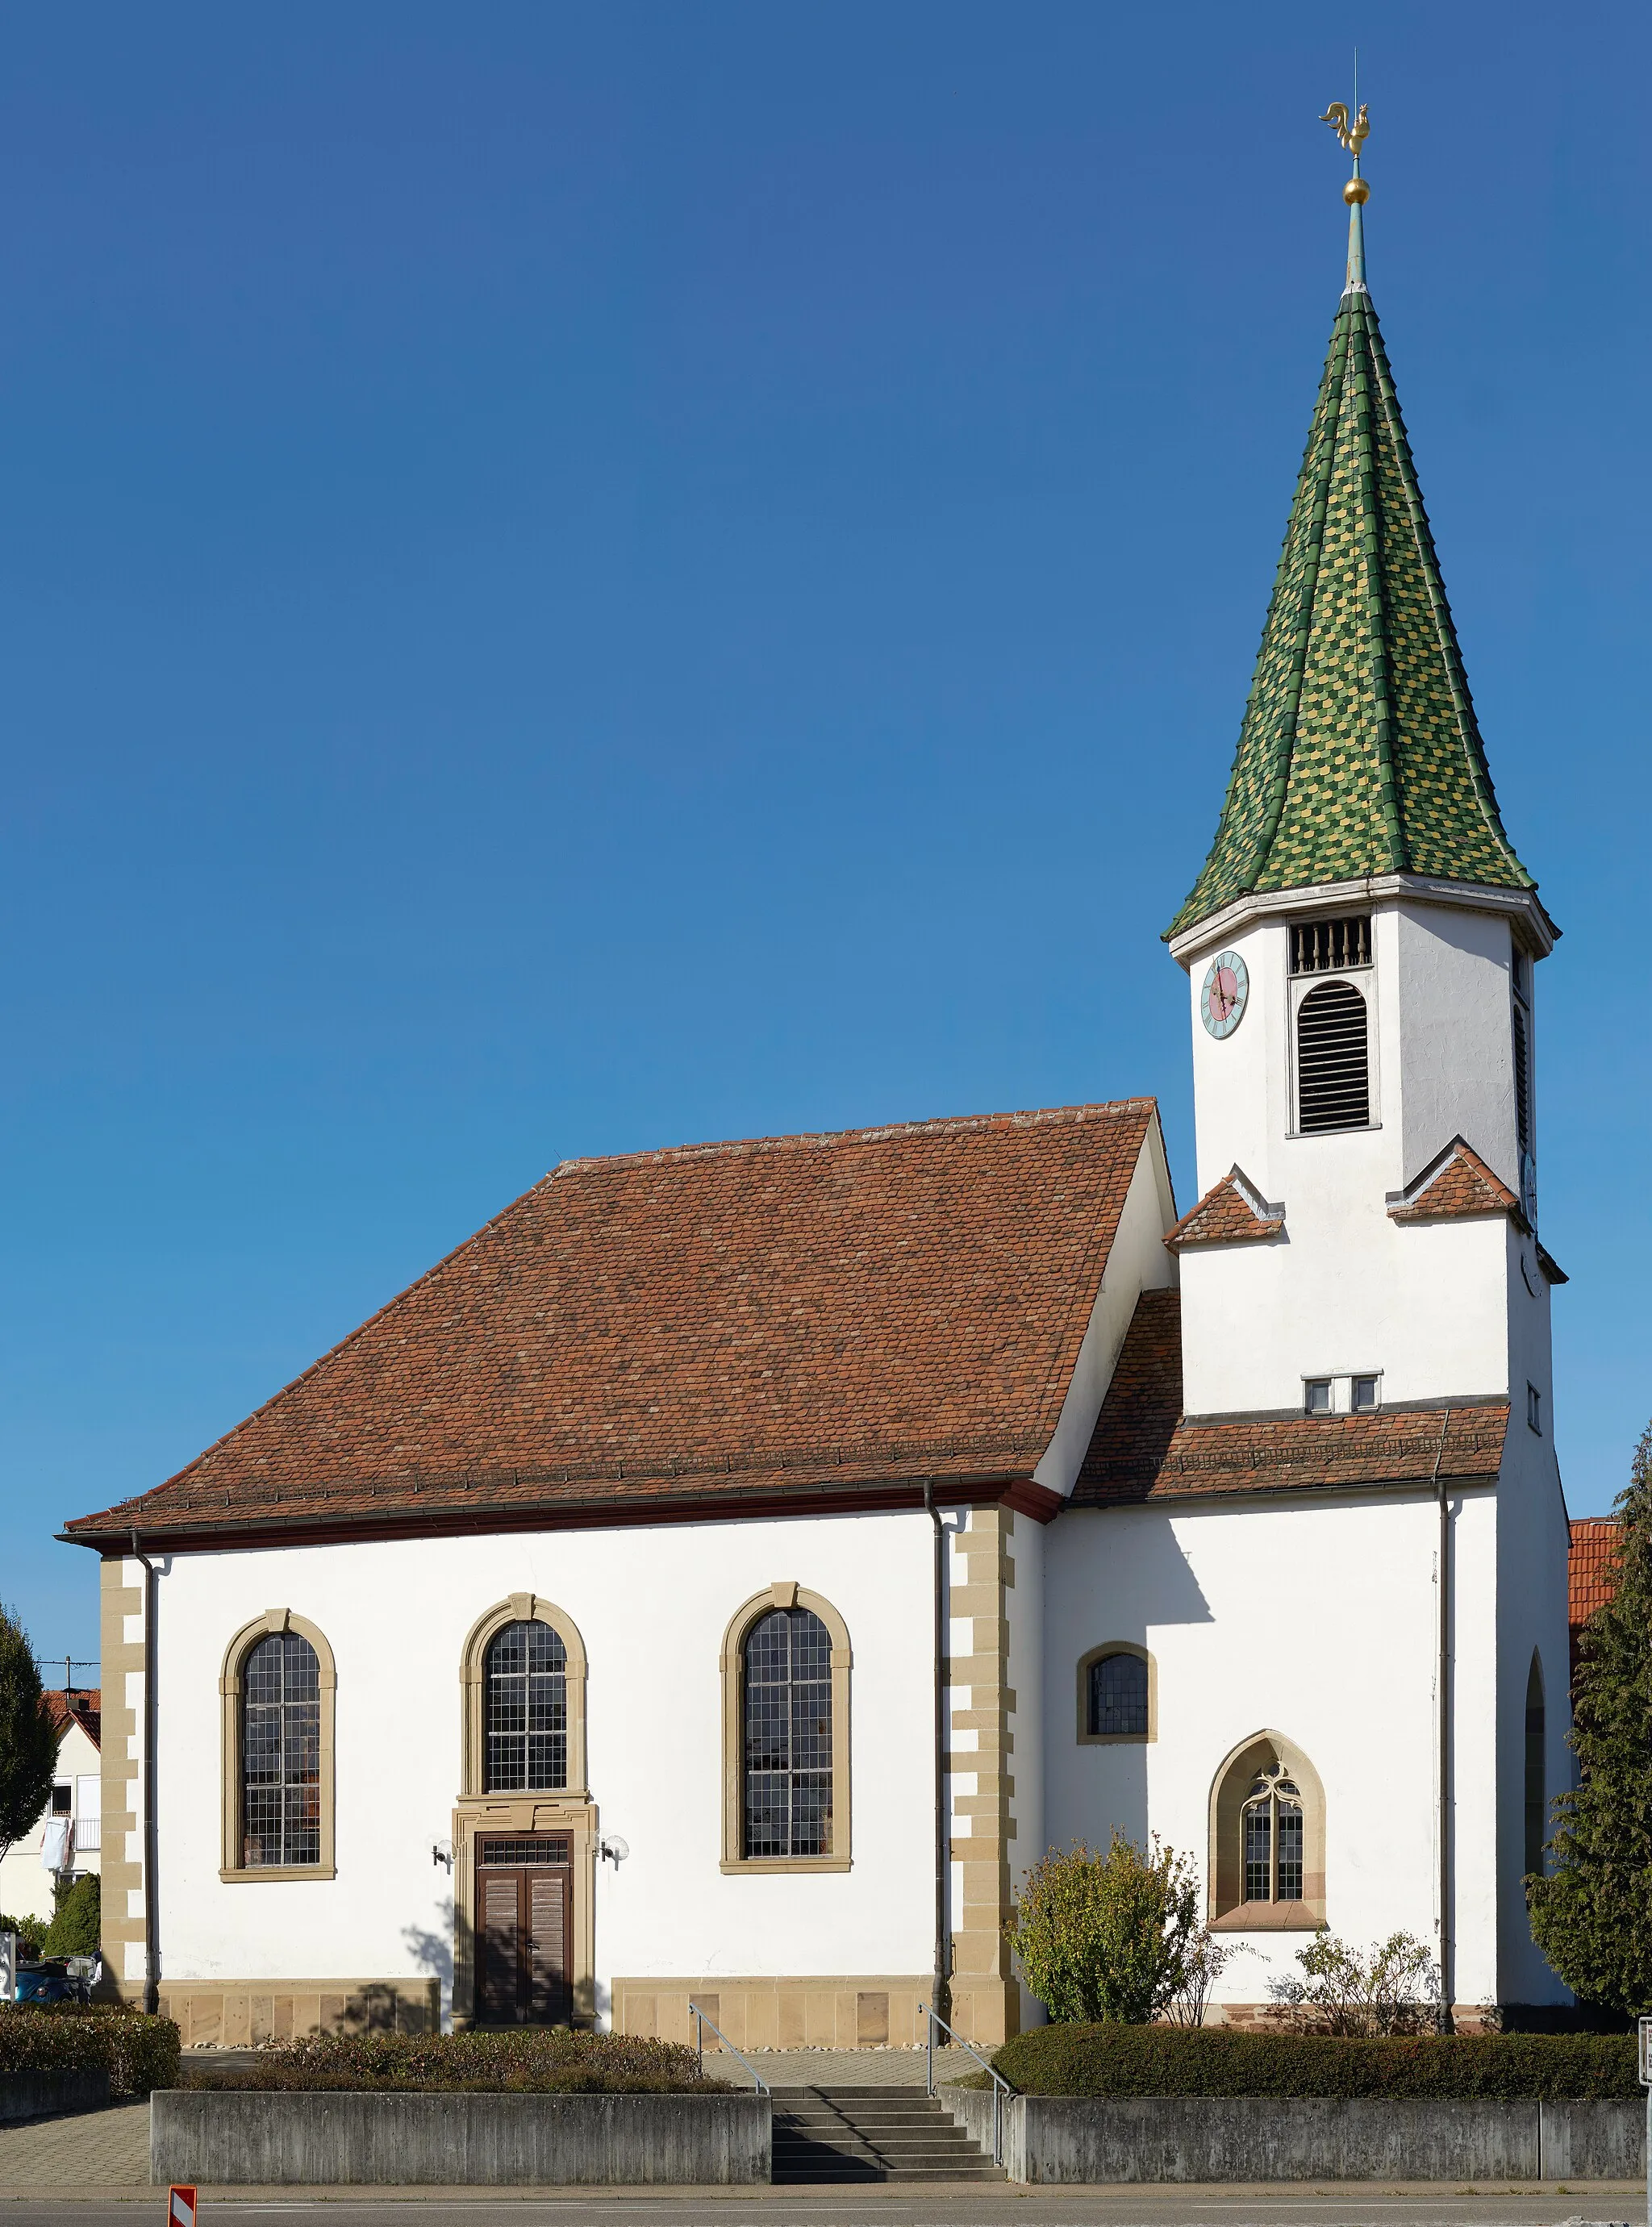 Photo showing: Protestant church in Winnenden-Hertmannsweiler, Baden-Württemberg, Germany; cultural monument.
Stitched with Hugin out of four single Images.

Camera: Sony Alpha 6000, Lens: Olympus Zuiko MC 50mm 1:1.8, Aperture 8.